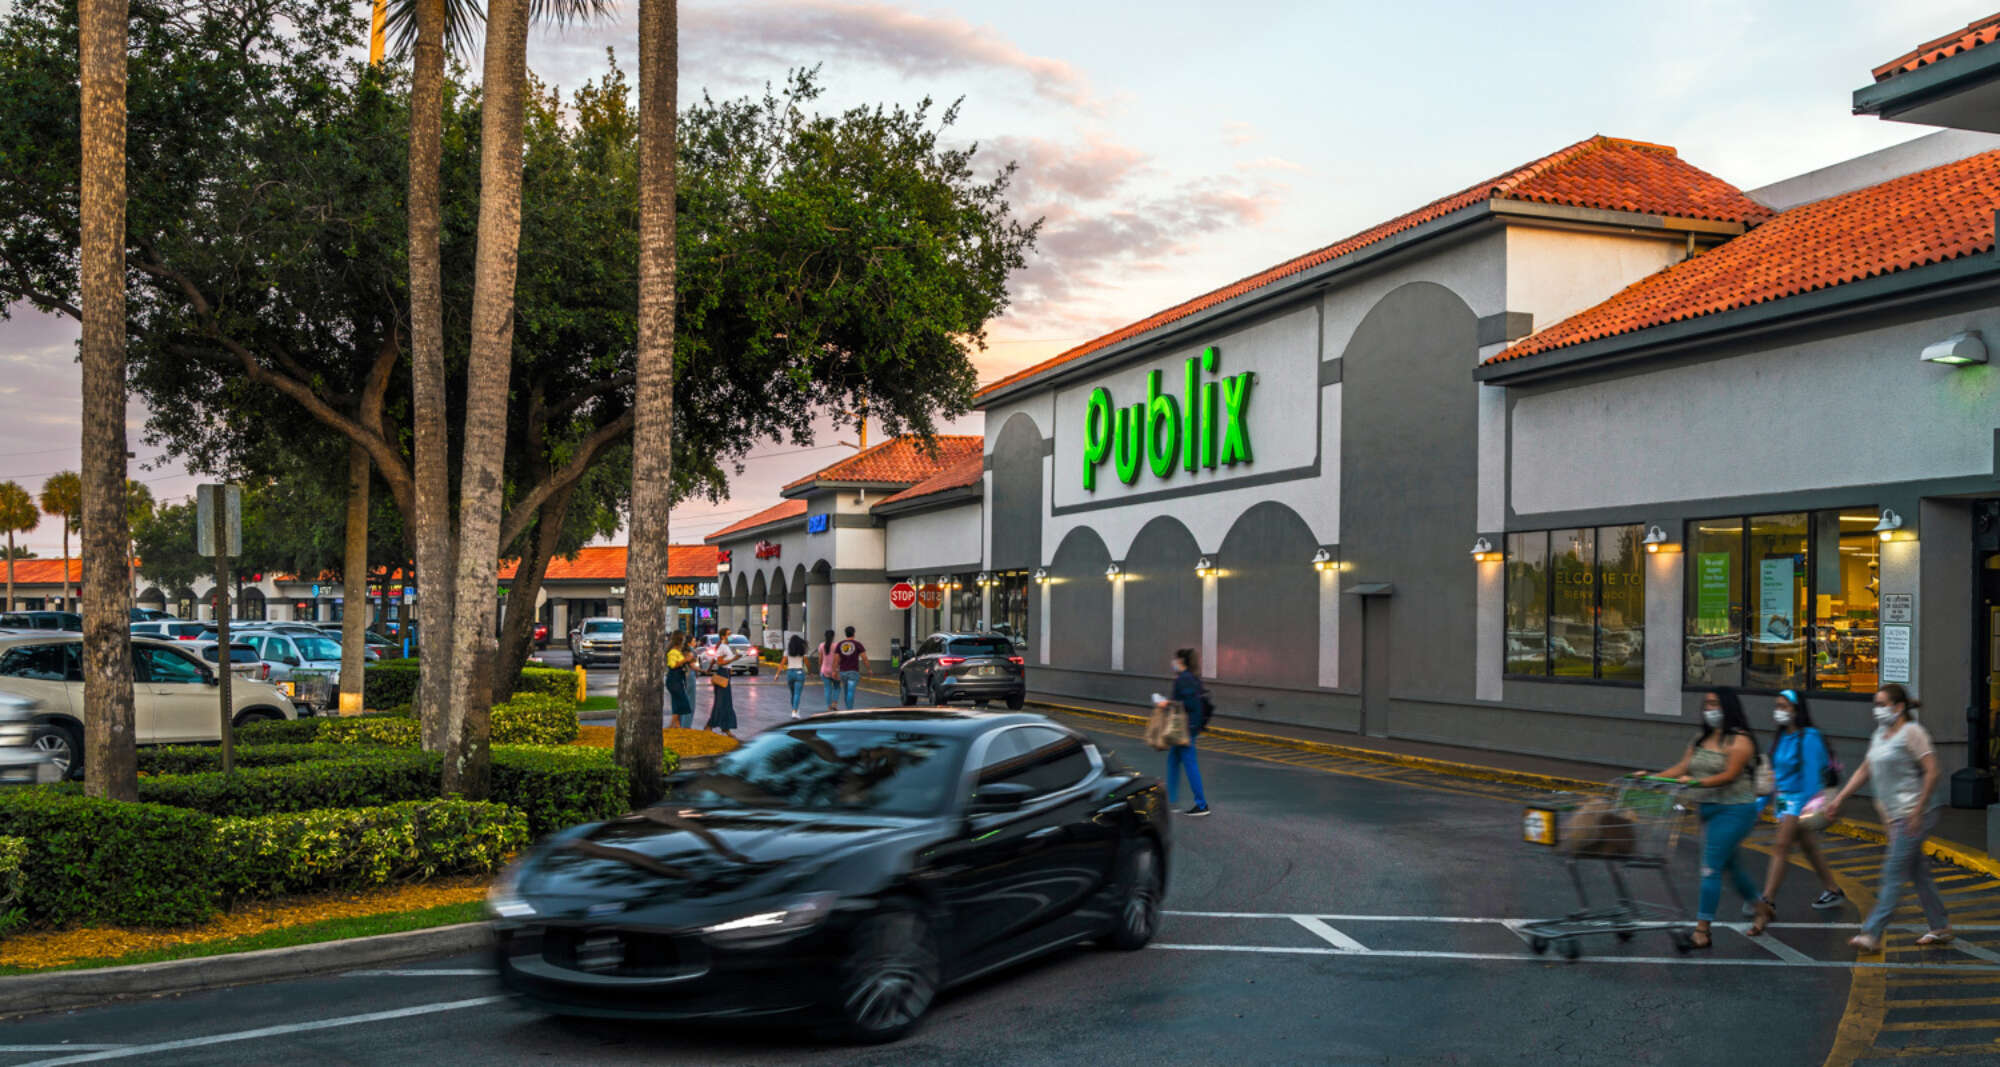 Grocery-anchored shopping center with Publix facade and pedestrians and cars on driveway